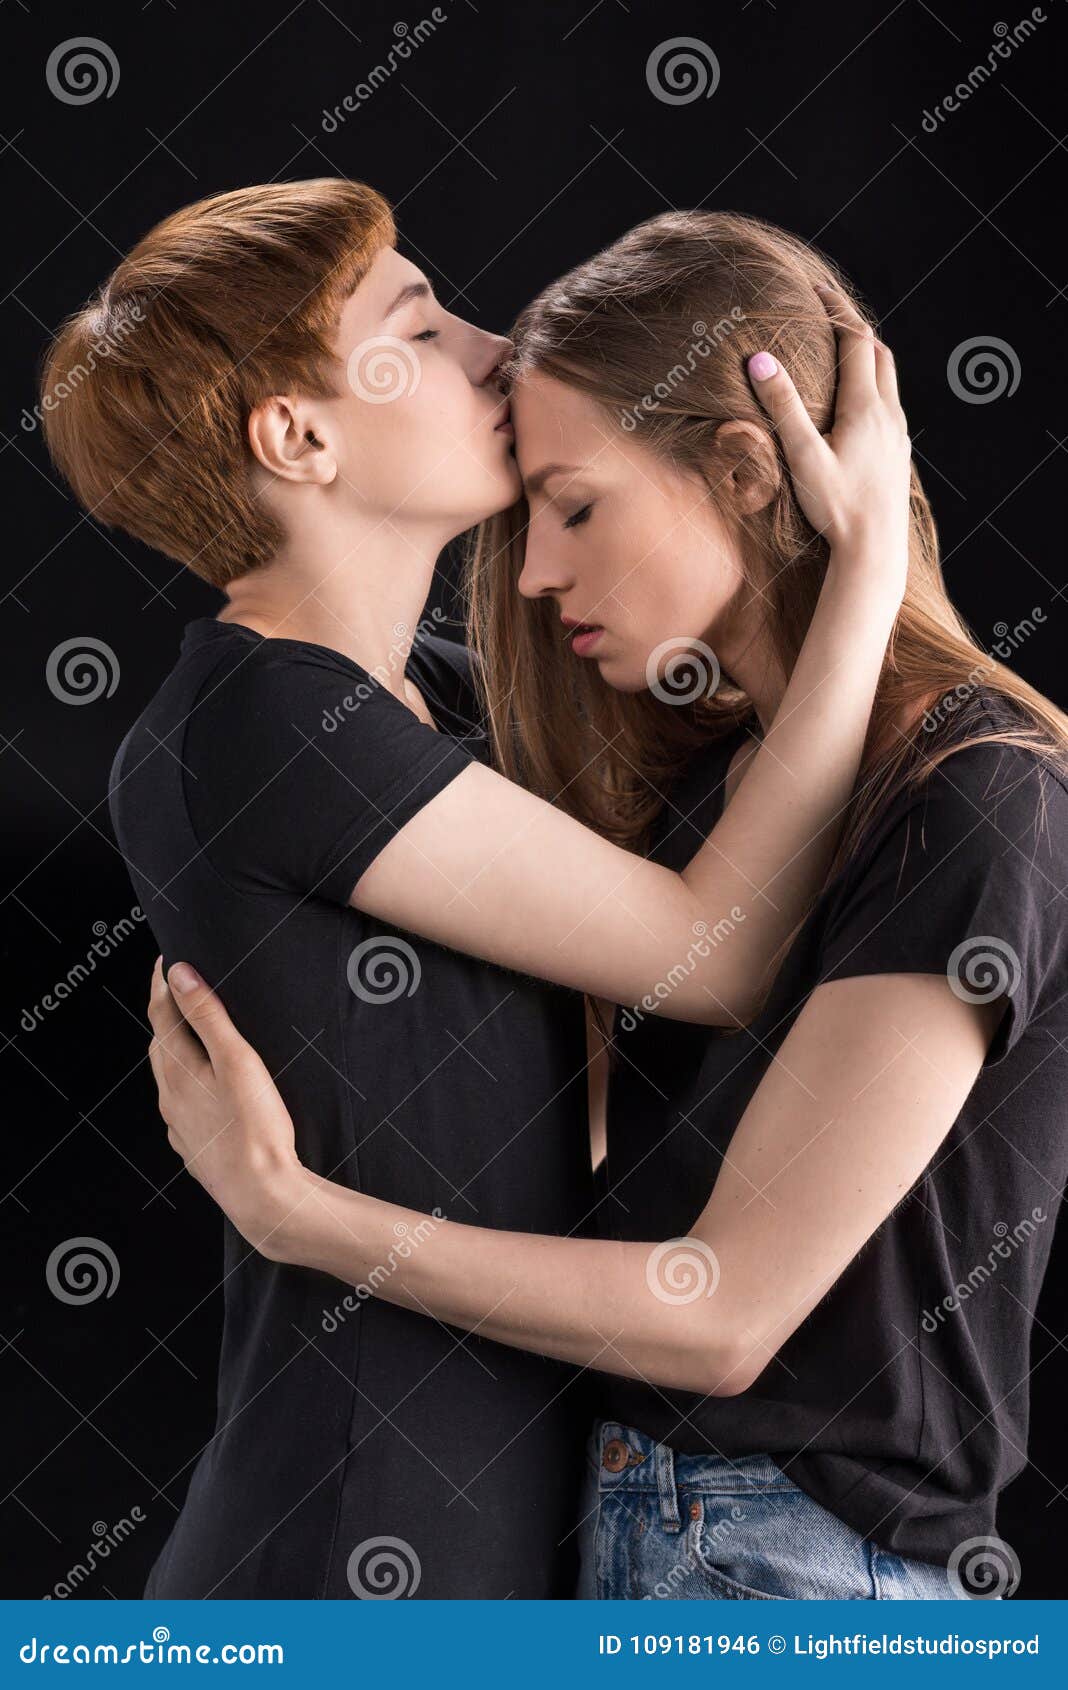 Women kissing young The 10